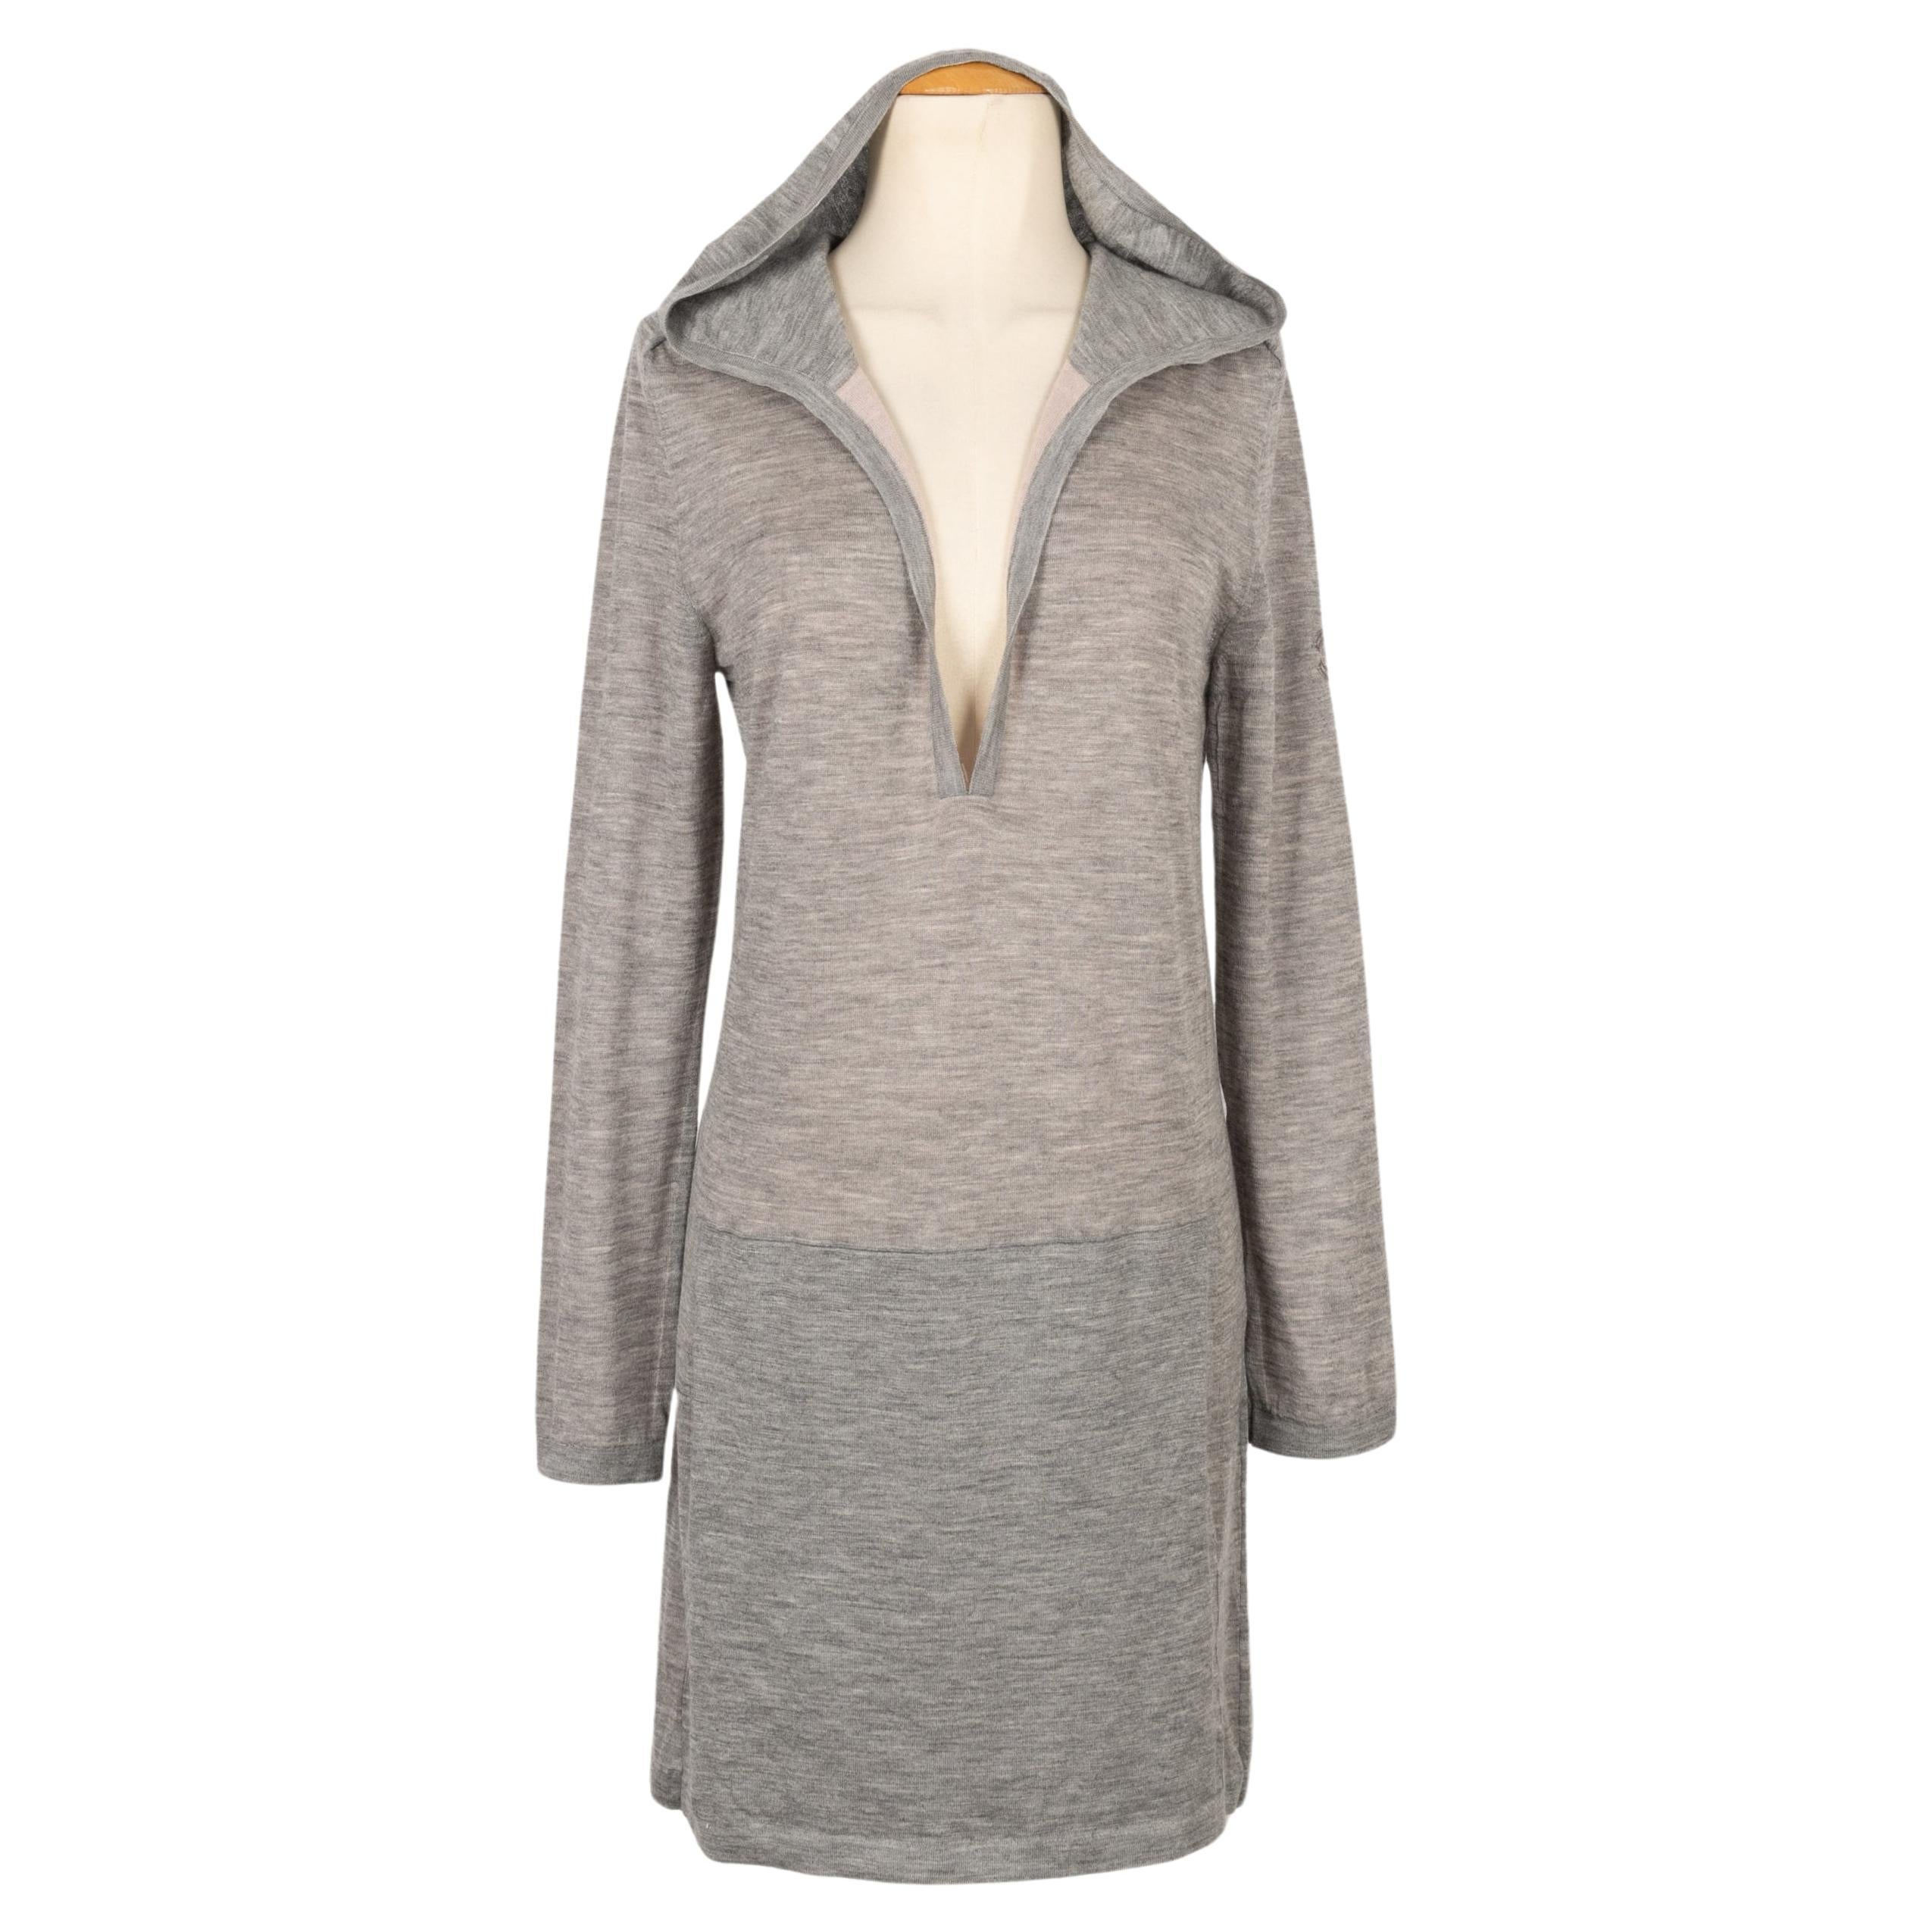 Chanel Grey Cashmere Hooded Pullover Dress